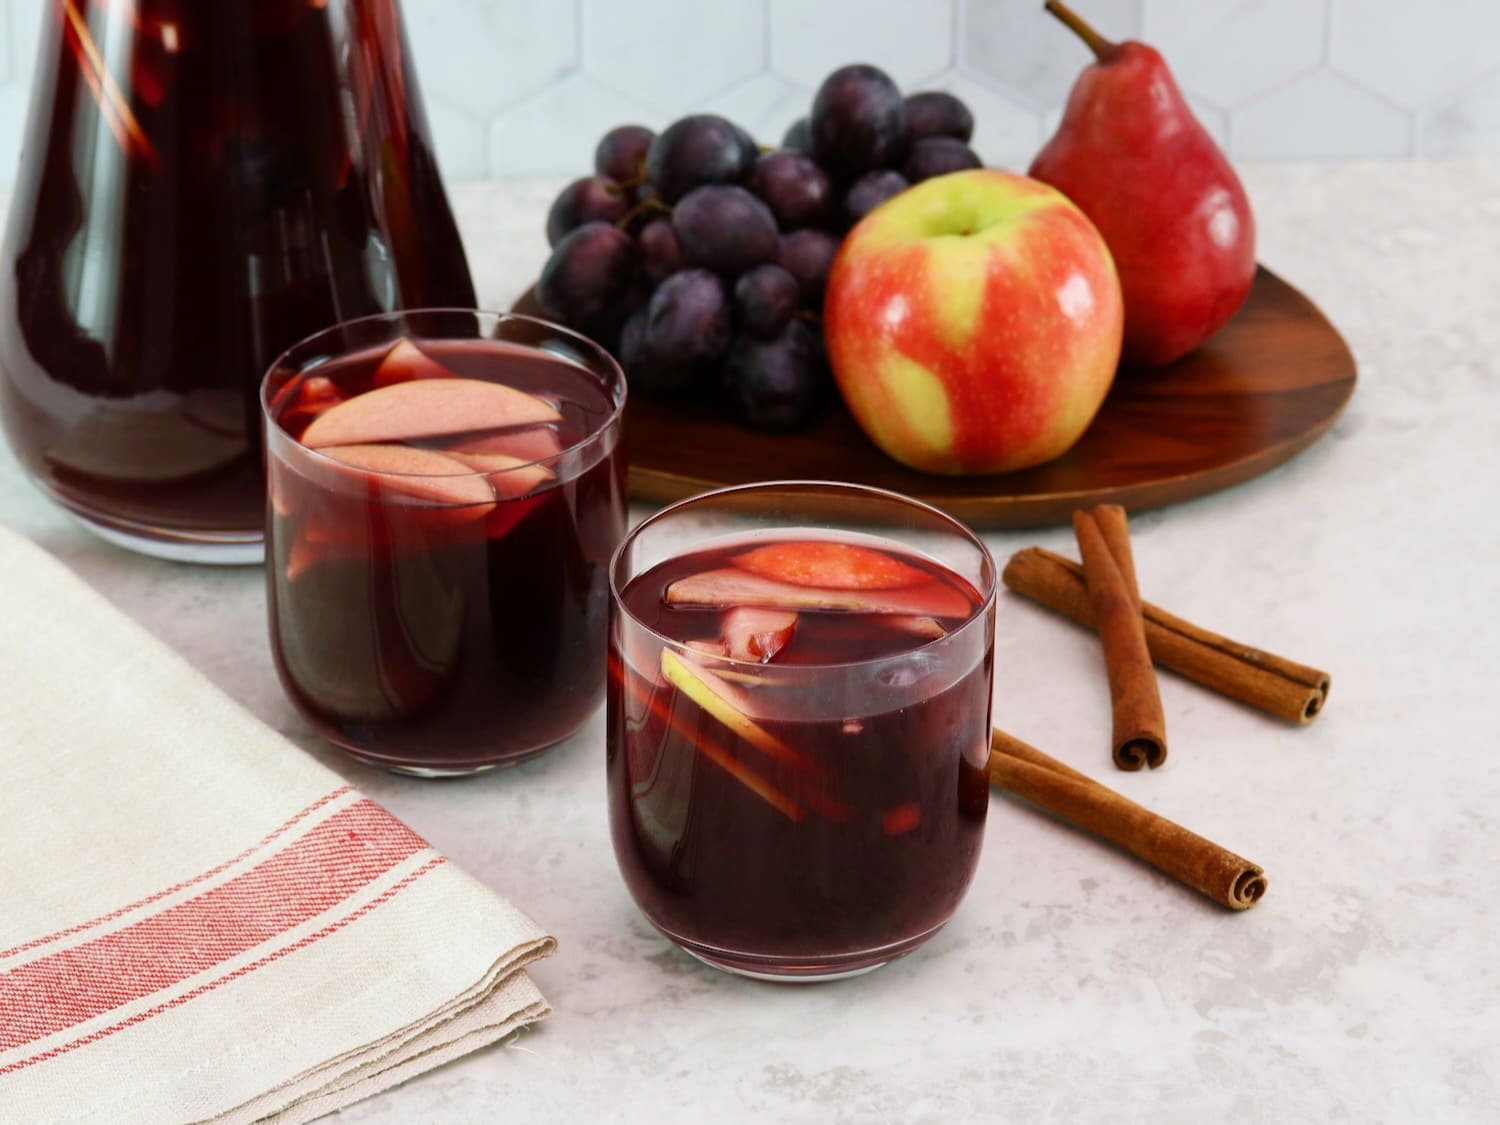 Close up shot - two unstemmed wine glasses filled with red wine Thanksgiving sangria, fresh fruit slices - apples and grapes floating in the cups. Linen towel beside the cups. On a white marble countertop with three cinnamon sticks, a platter of fruit - apple, grapes, pears - and a large pitcher of sangria in the background.